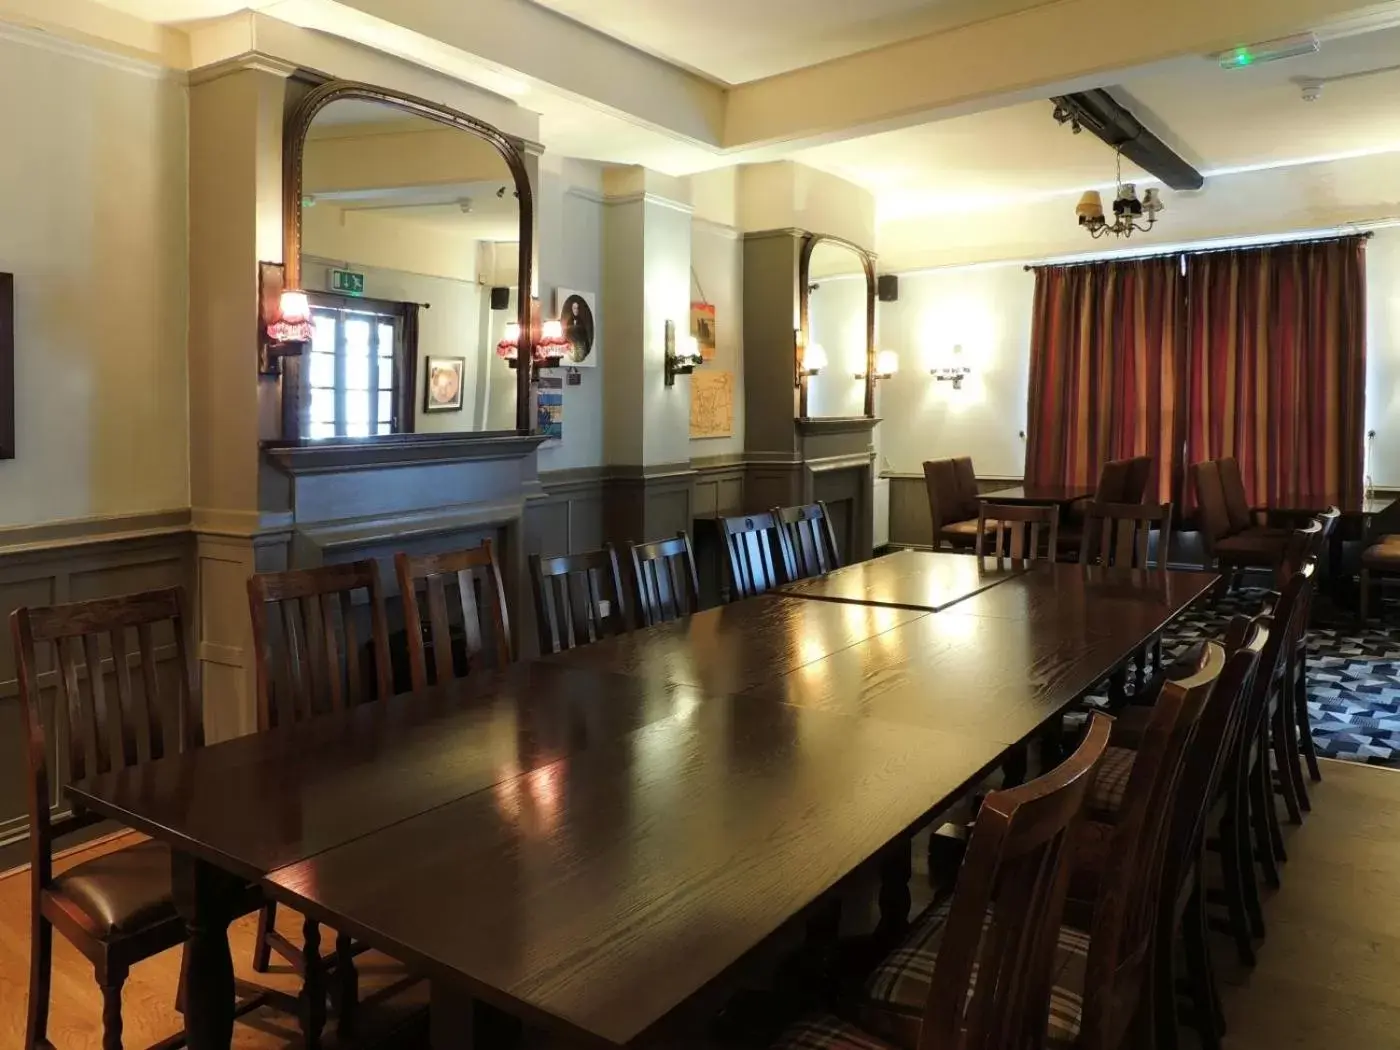 Meeting/conference room in Bacon Arms, Newbury